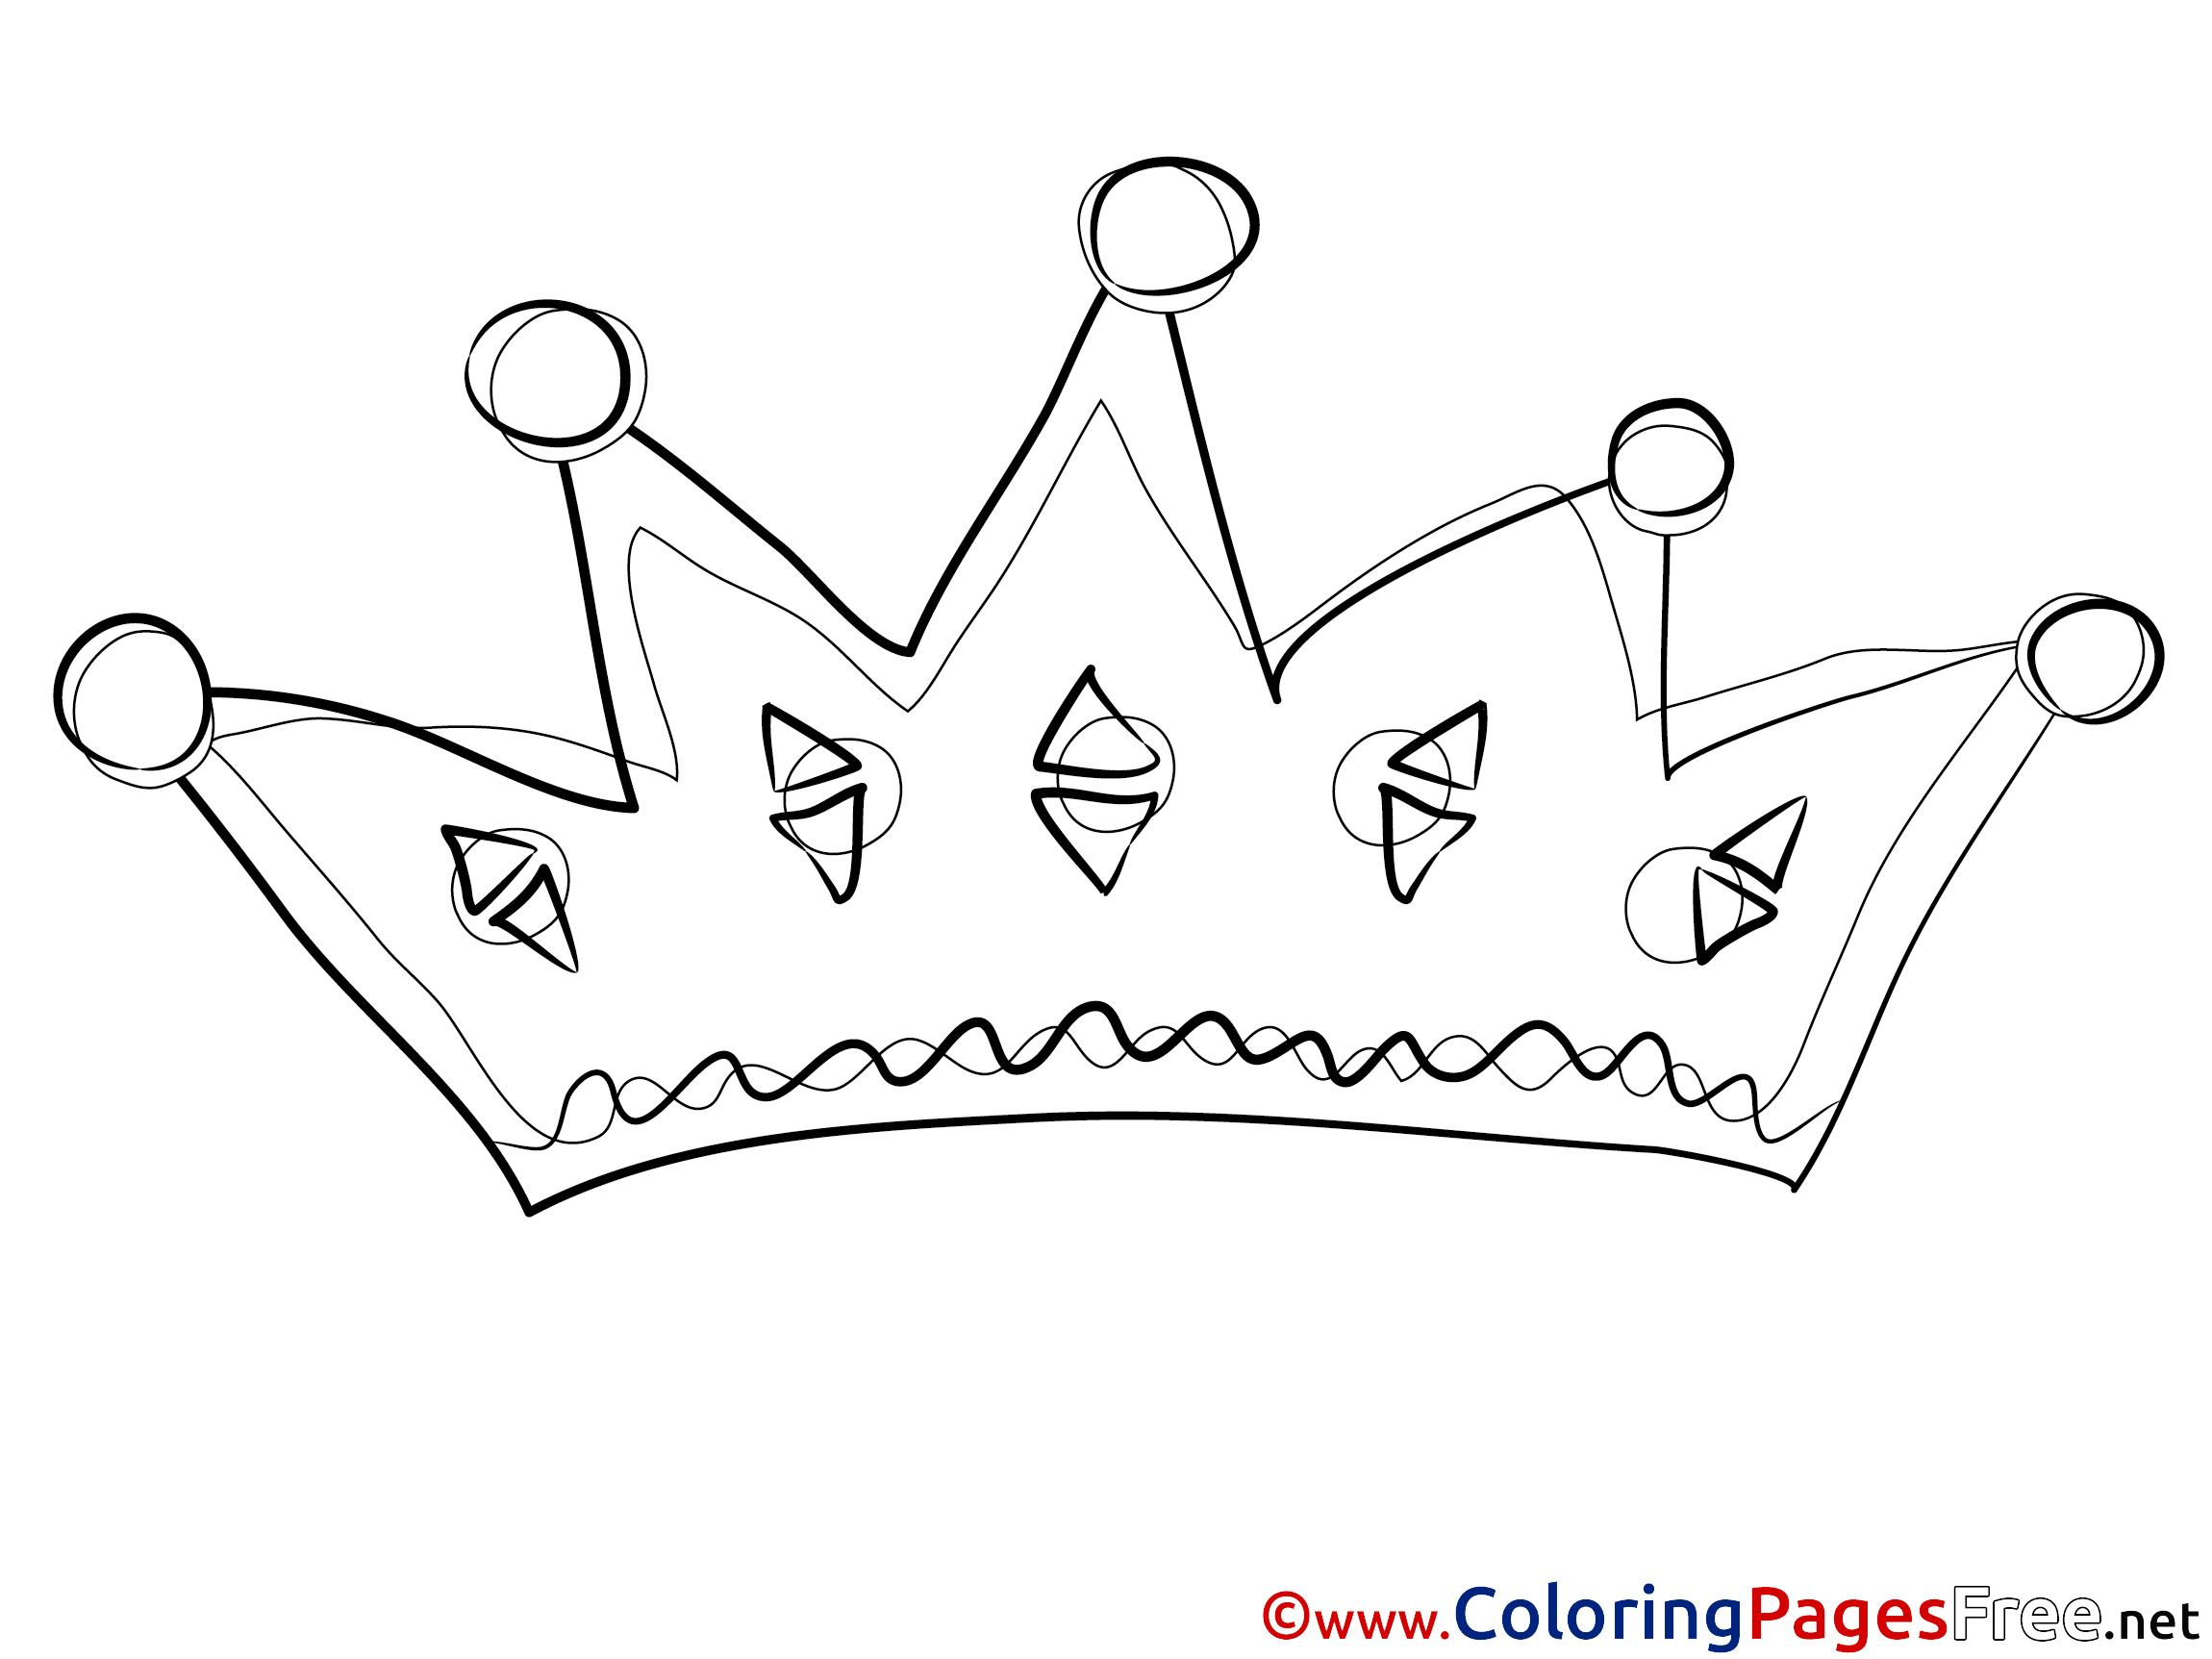 Crown Kids download Coloring Pages